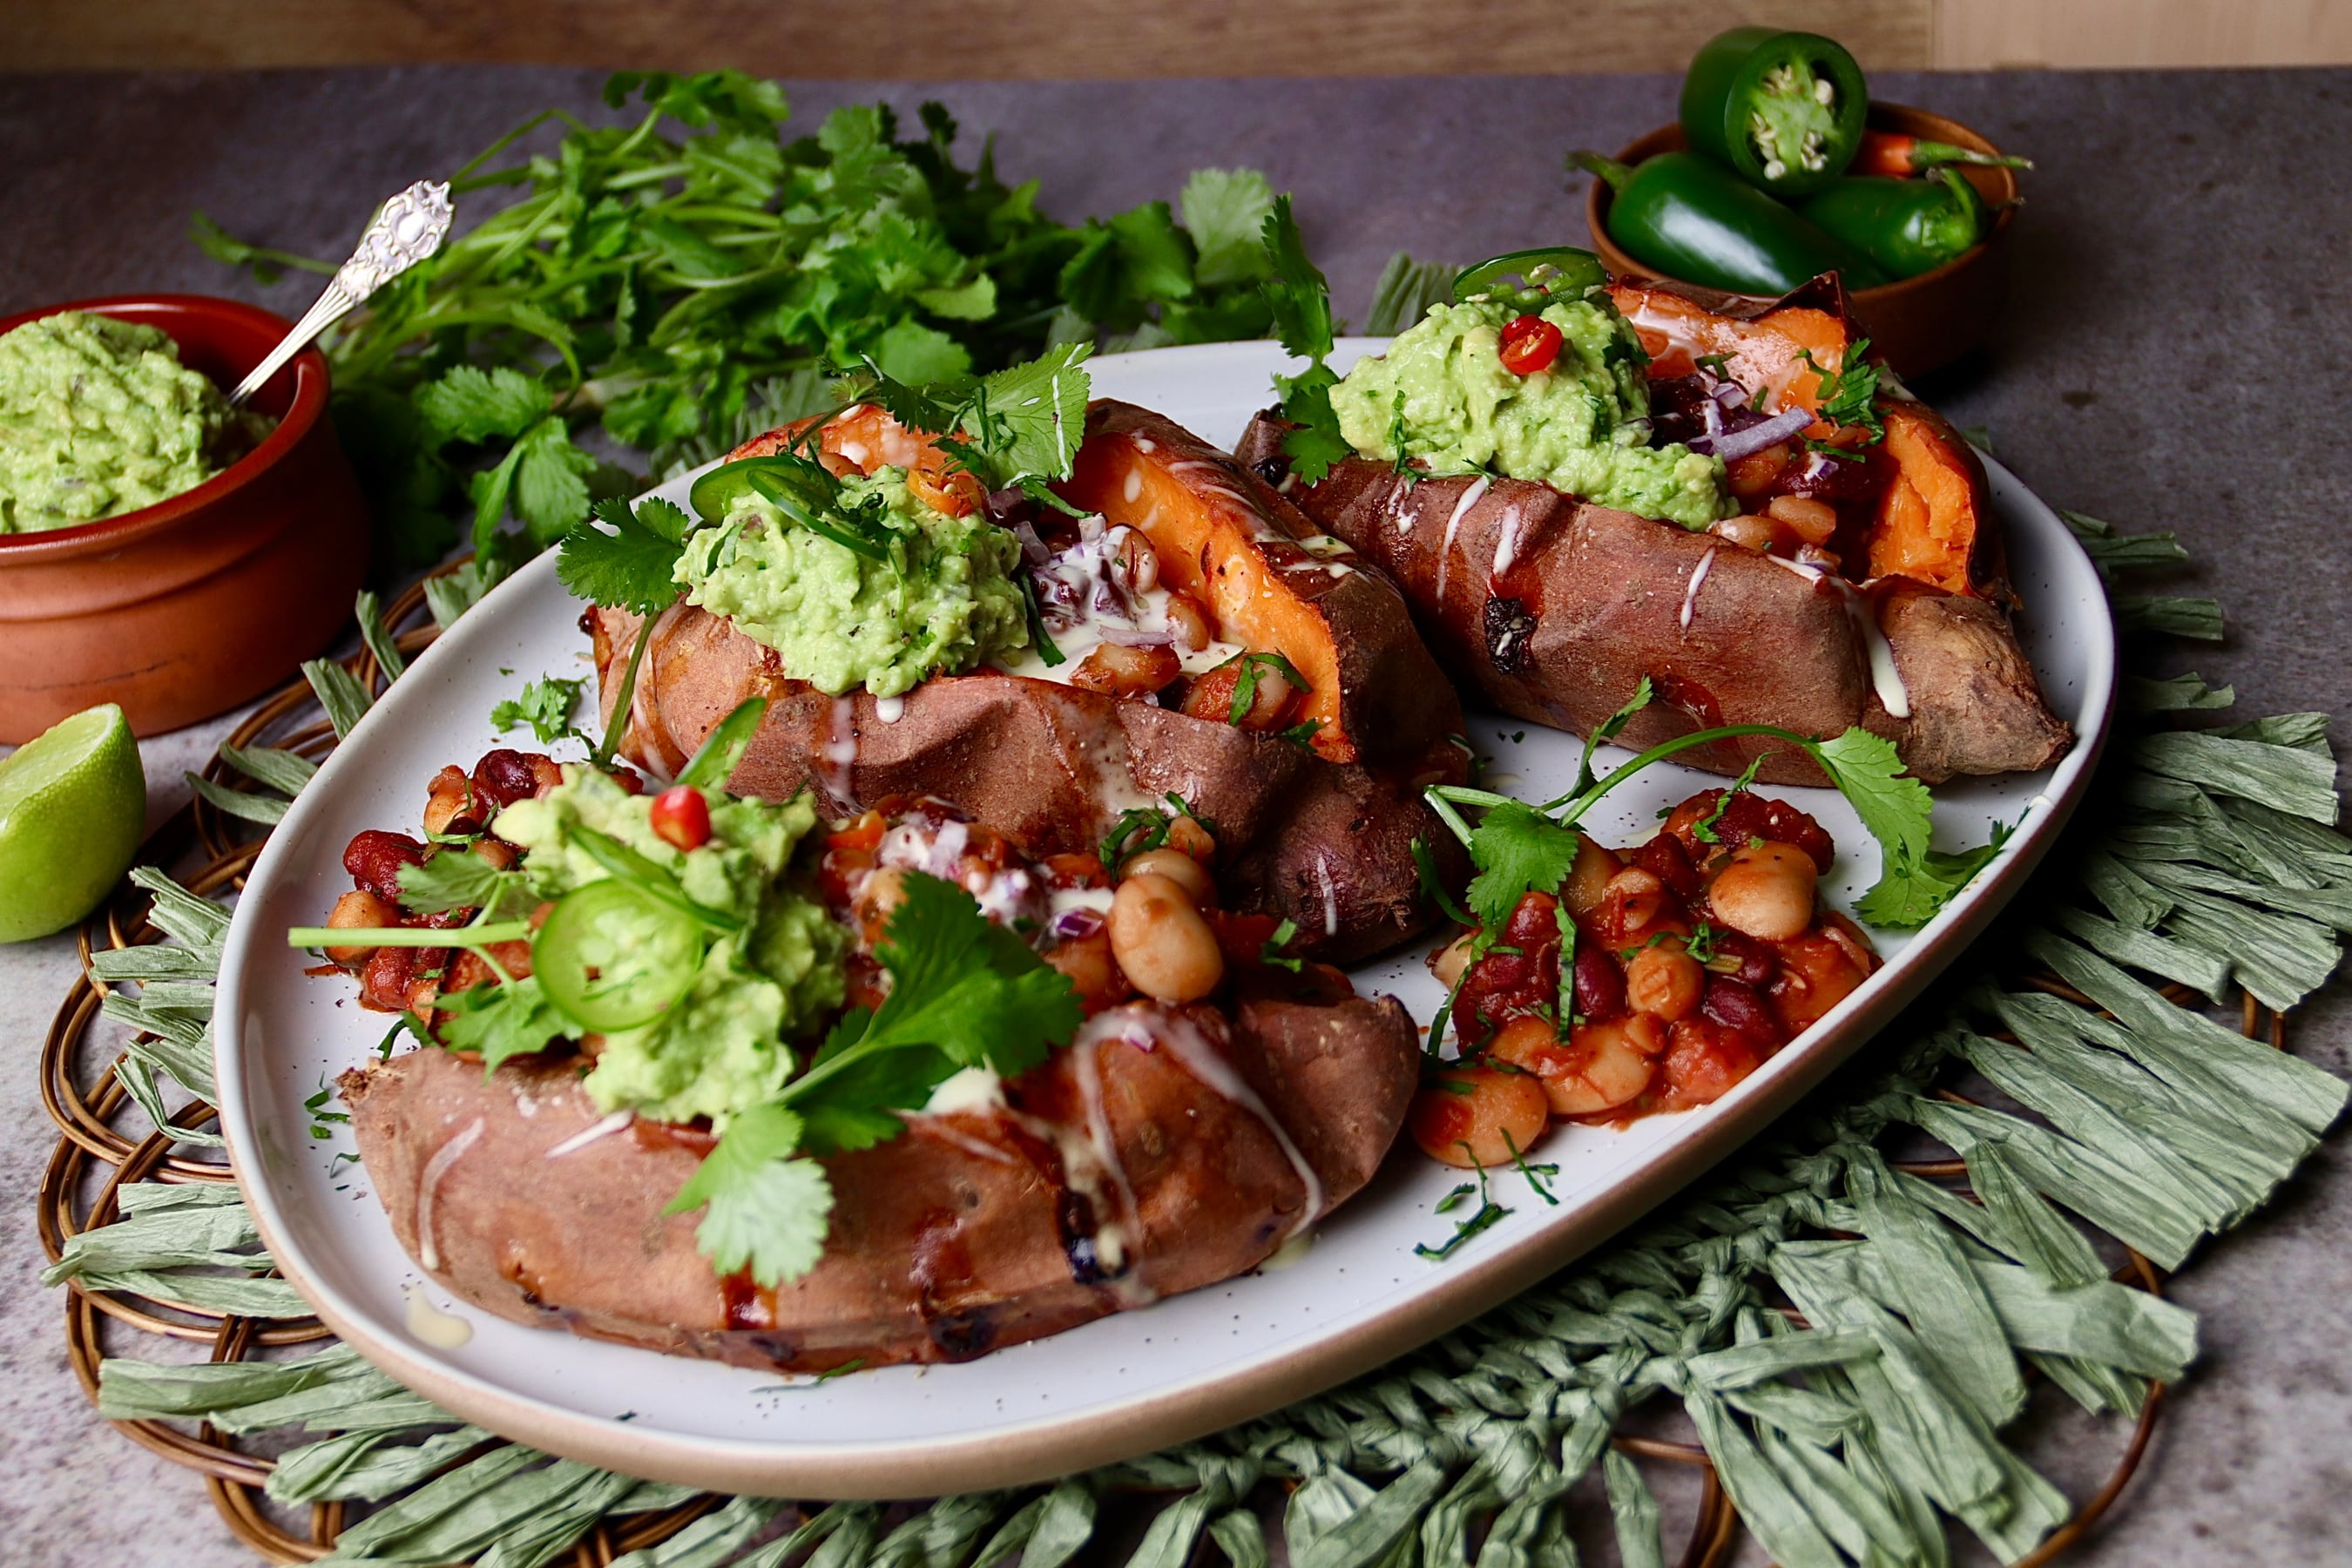 Roast sweet potatoes filled with smoky bean salsa, guacamole and sour cream